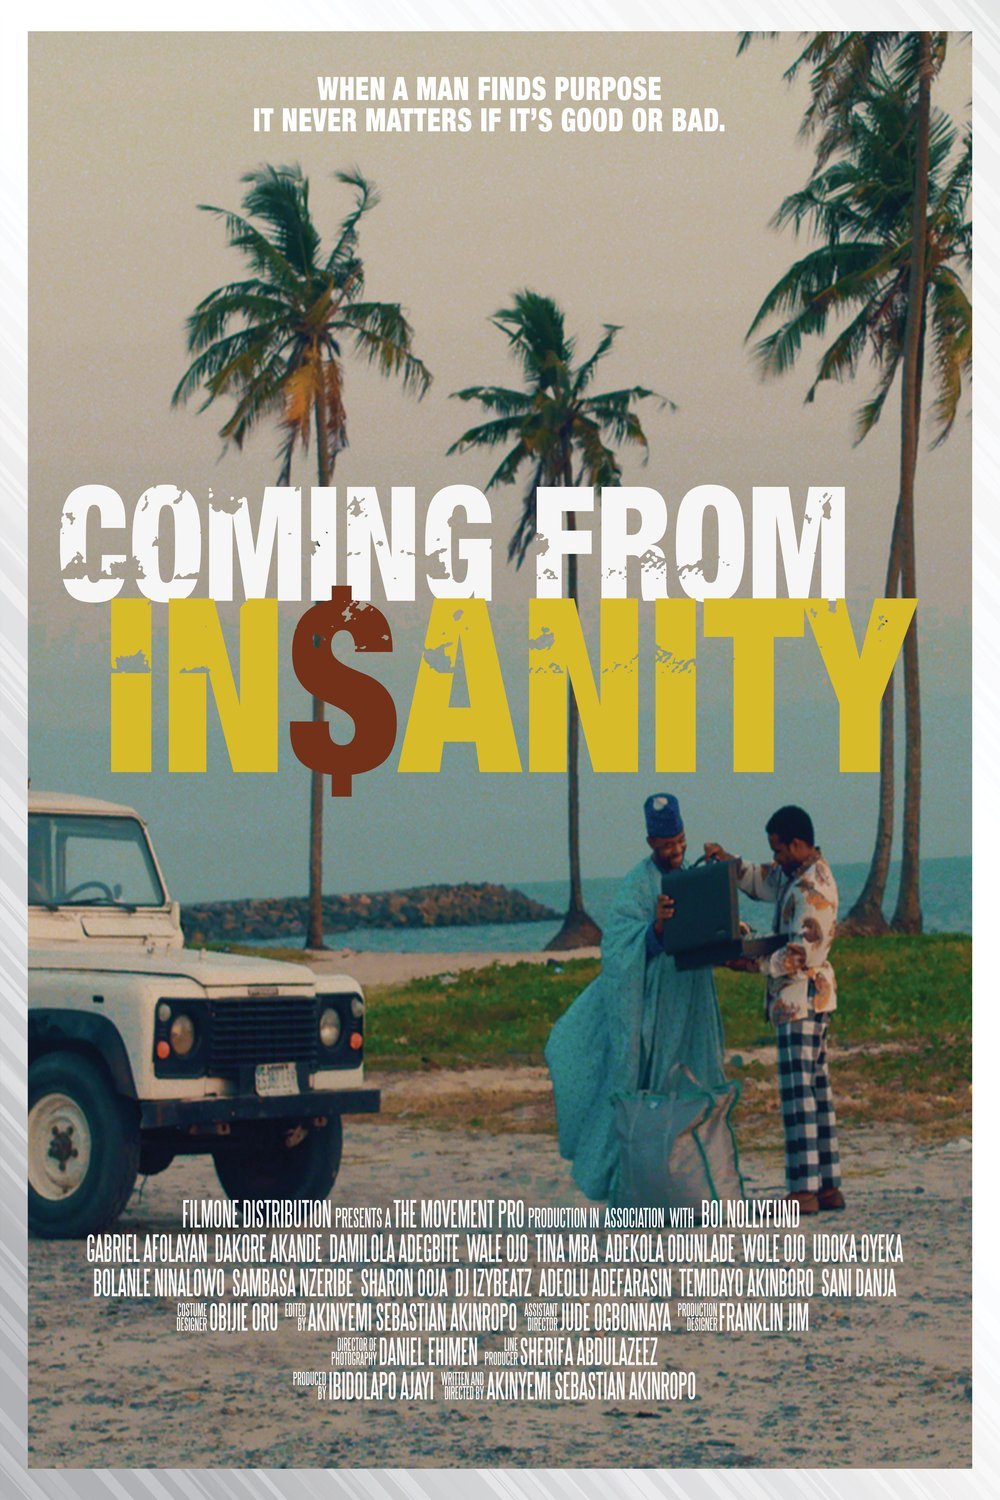 Poster of the movie Coming from Insanity